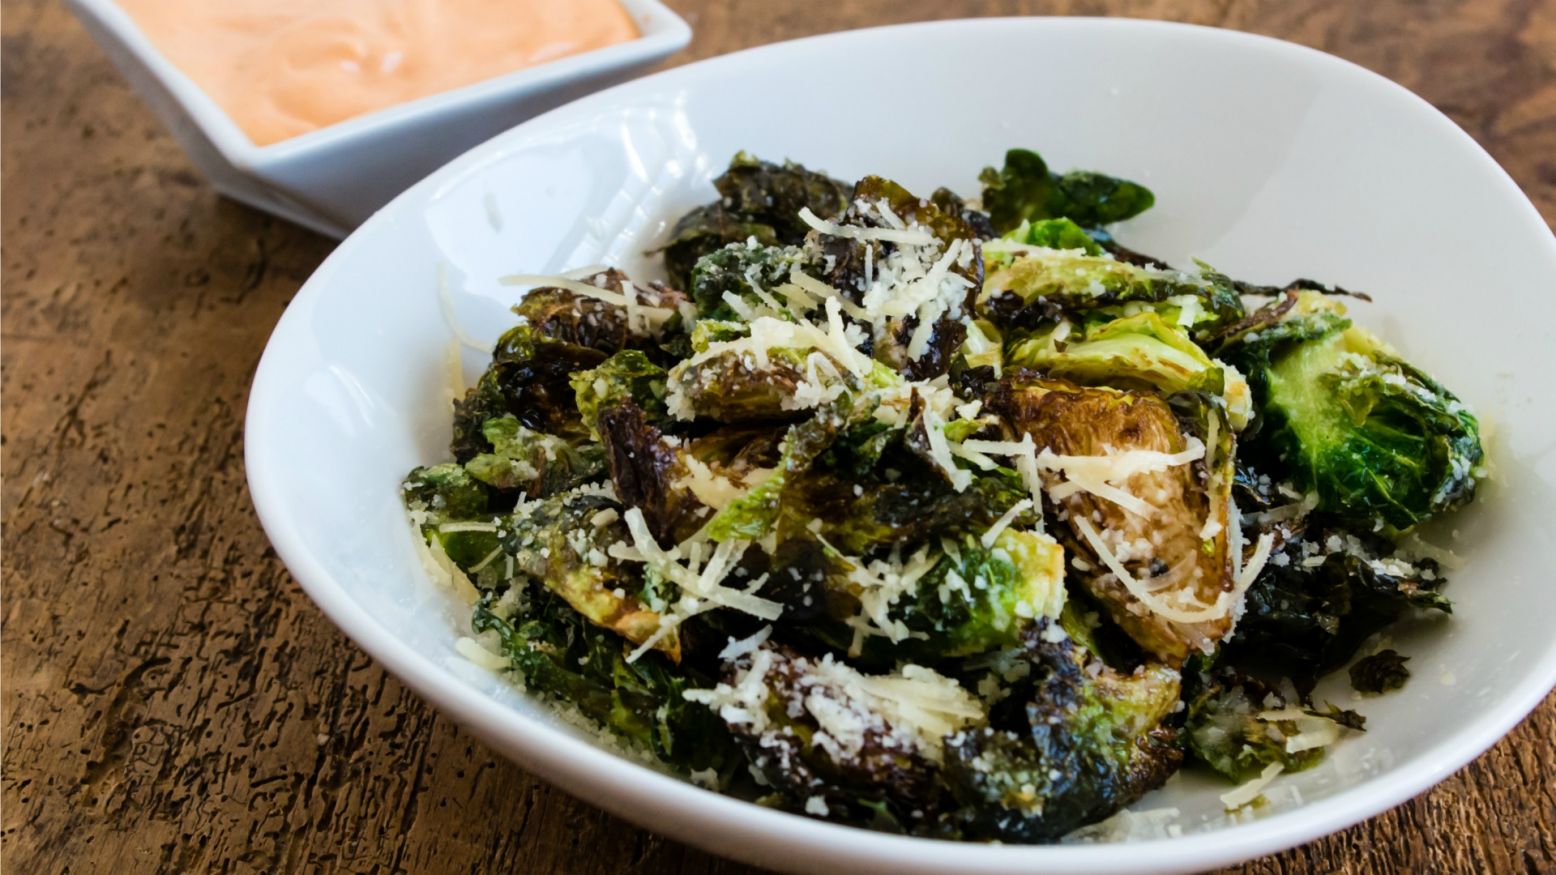 Fried Brussels Sprouts with Chipotle Mayo